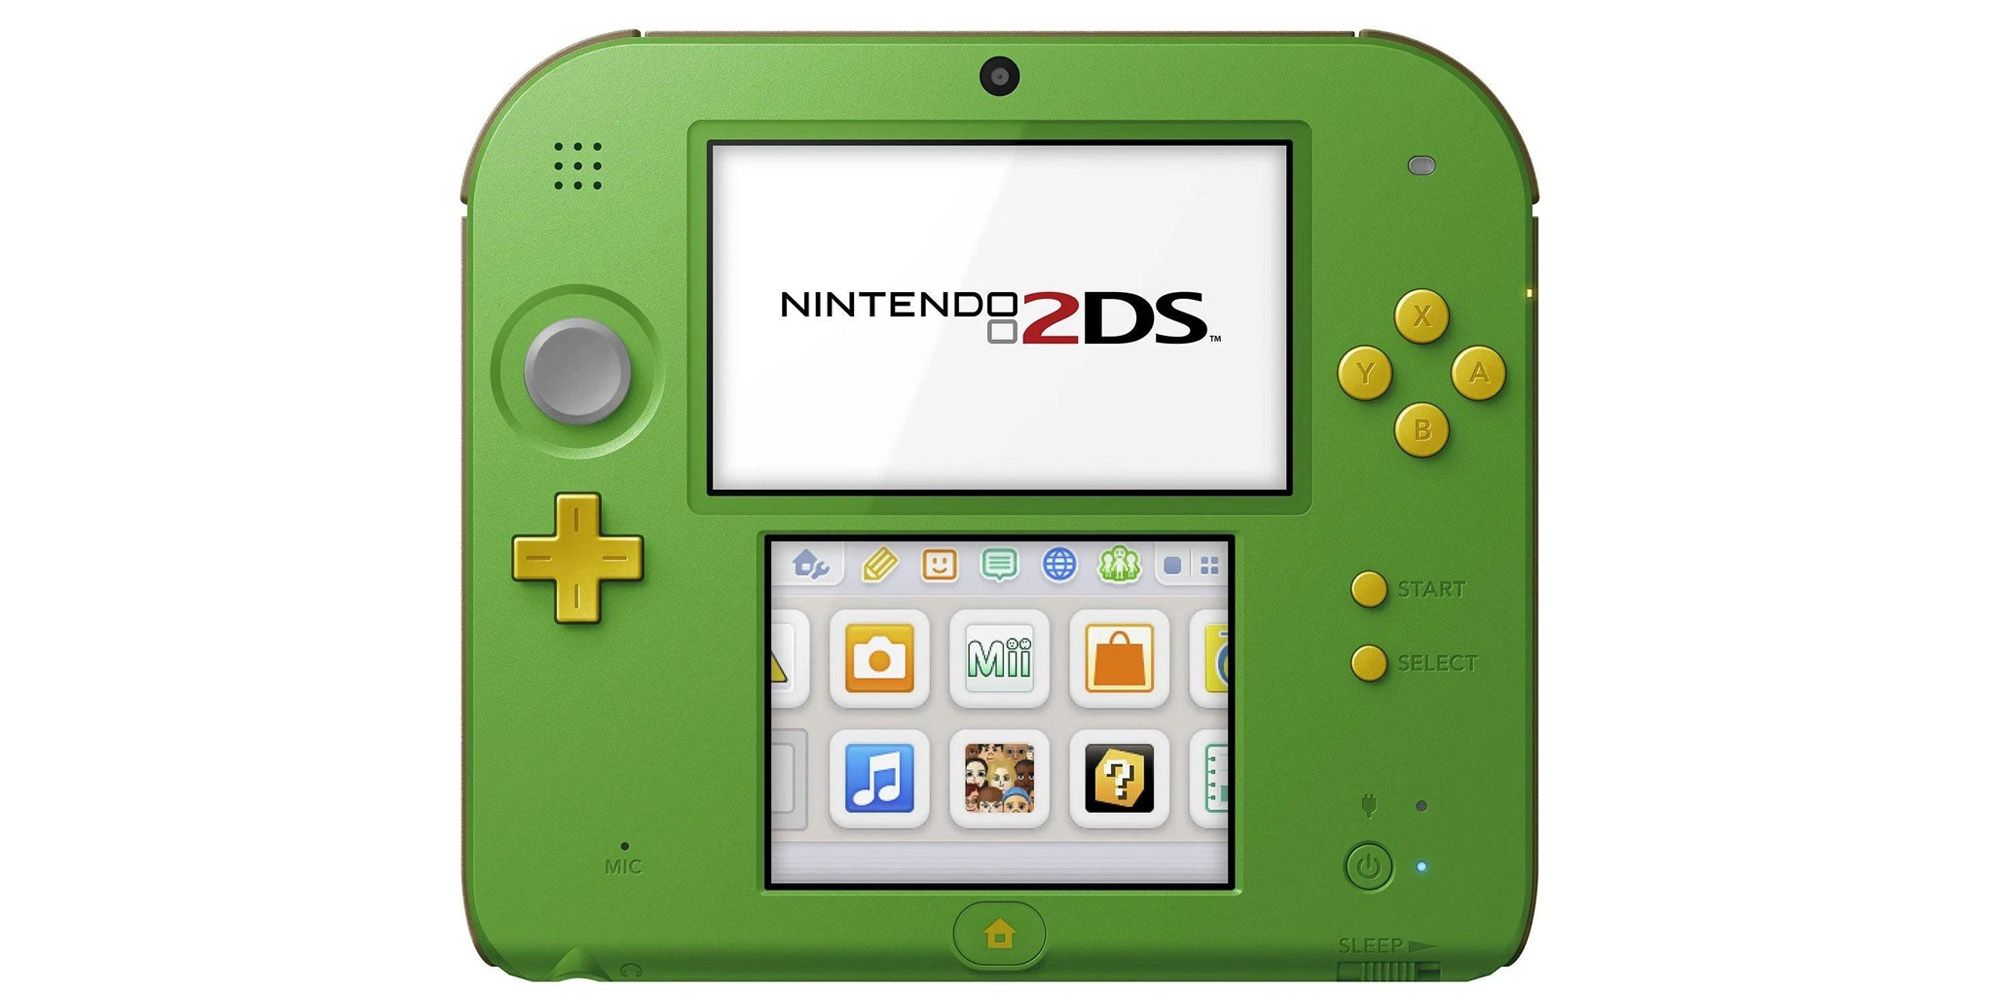 A green Nintendo 2DS with yellow buttons themed after Zelda protagonist Link.